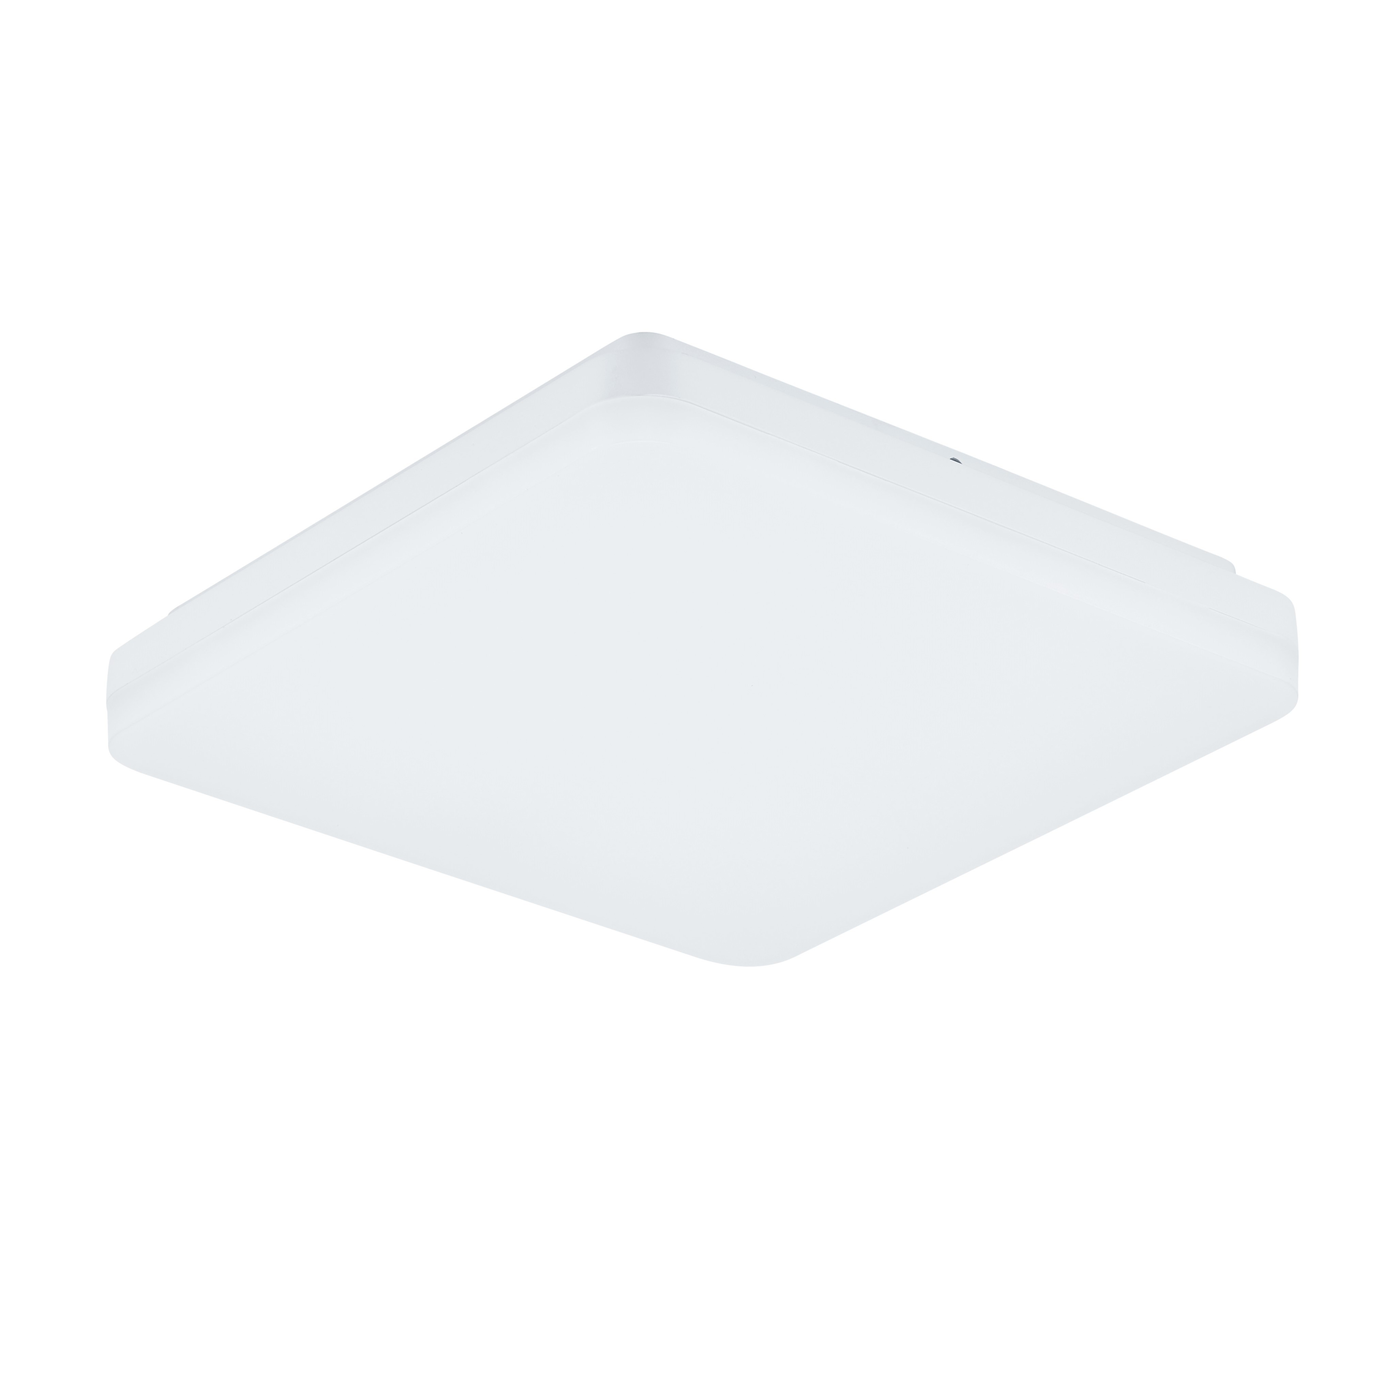 Anbauleuchte LED SLICE SQUARE N III weiss, 18/24W, 3000/4000K, IP20, NOT